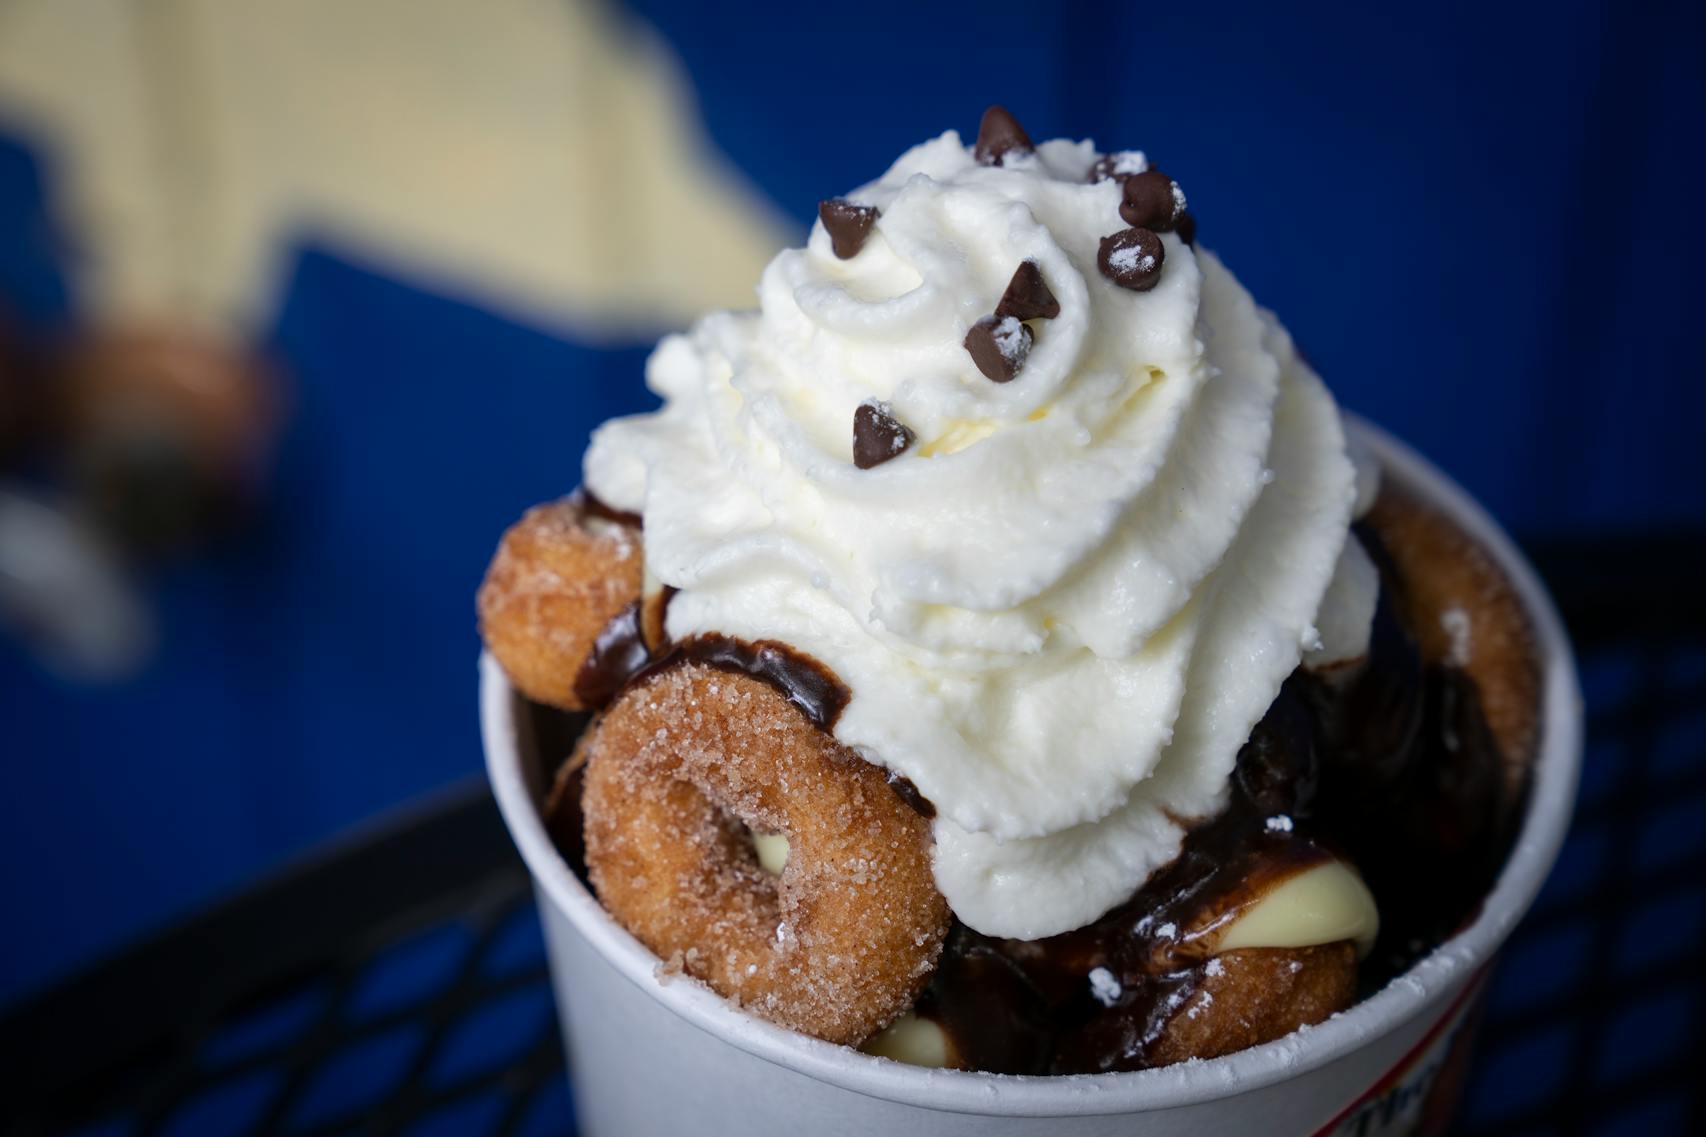 Boston Cream Mini-Donuts from The Donut Family. The new foods of the 2023 Minnesota State Fair photographed on the first day of the fair in Falcon Heights, Minn. on Tuesday, Aug. 8, 2023. ] LEILA NAVIDI • leila.navidi@startribune.com